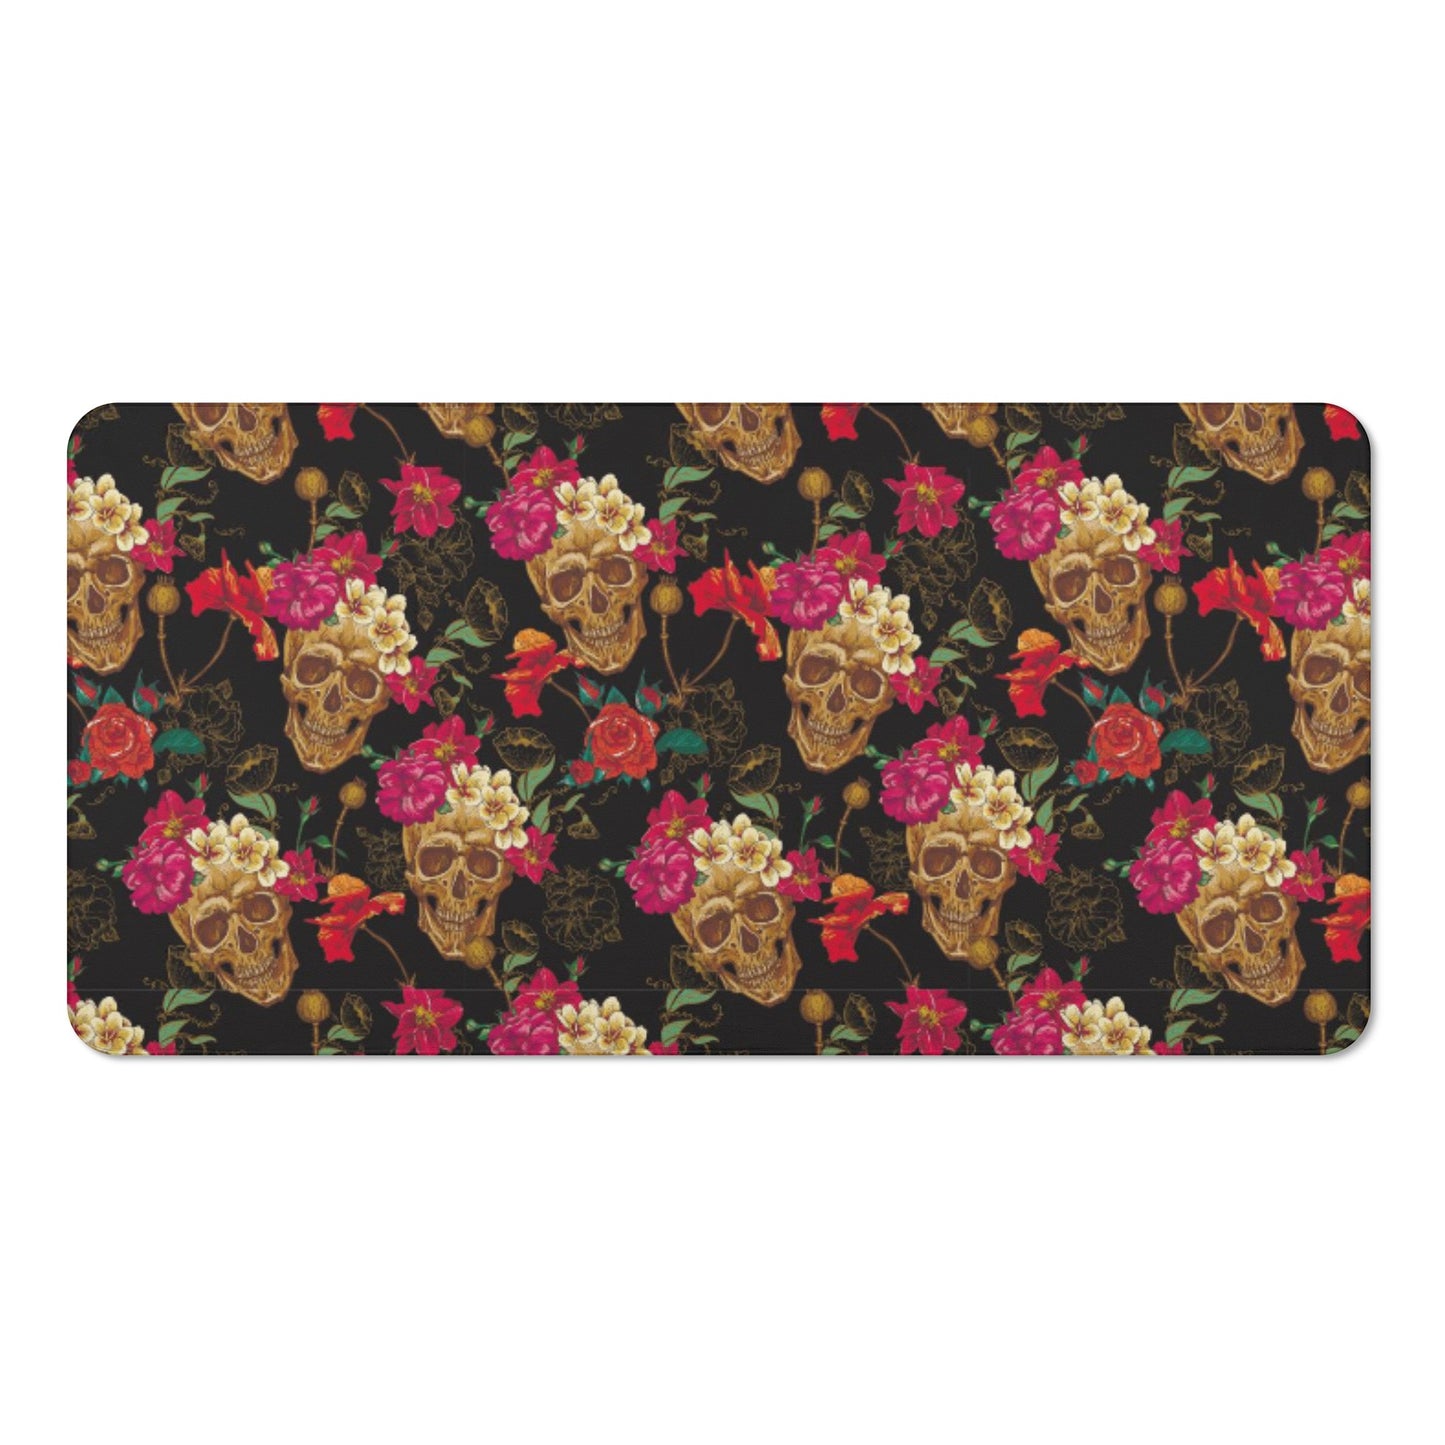 Day of the dead candy skull gothic Bath Towel